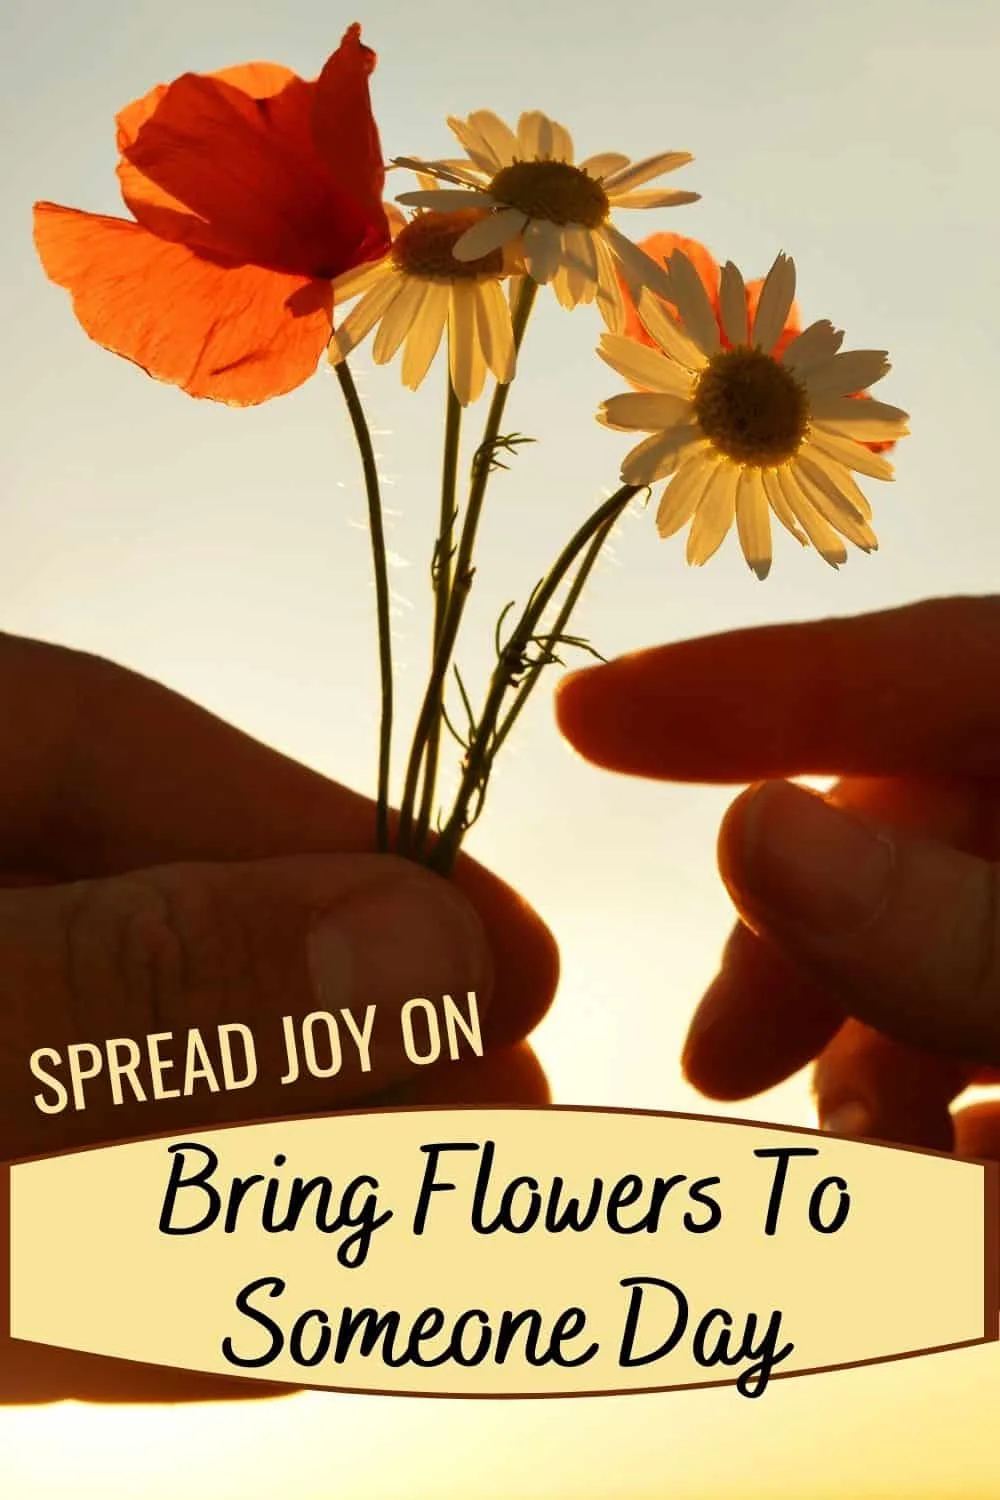 Spread joy on Bring Flowers To Someone Day